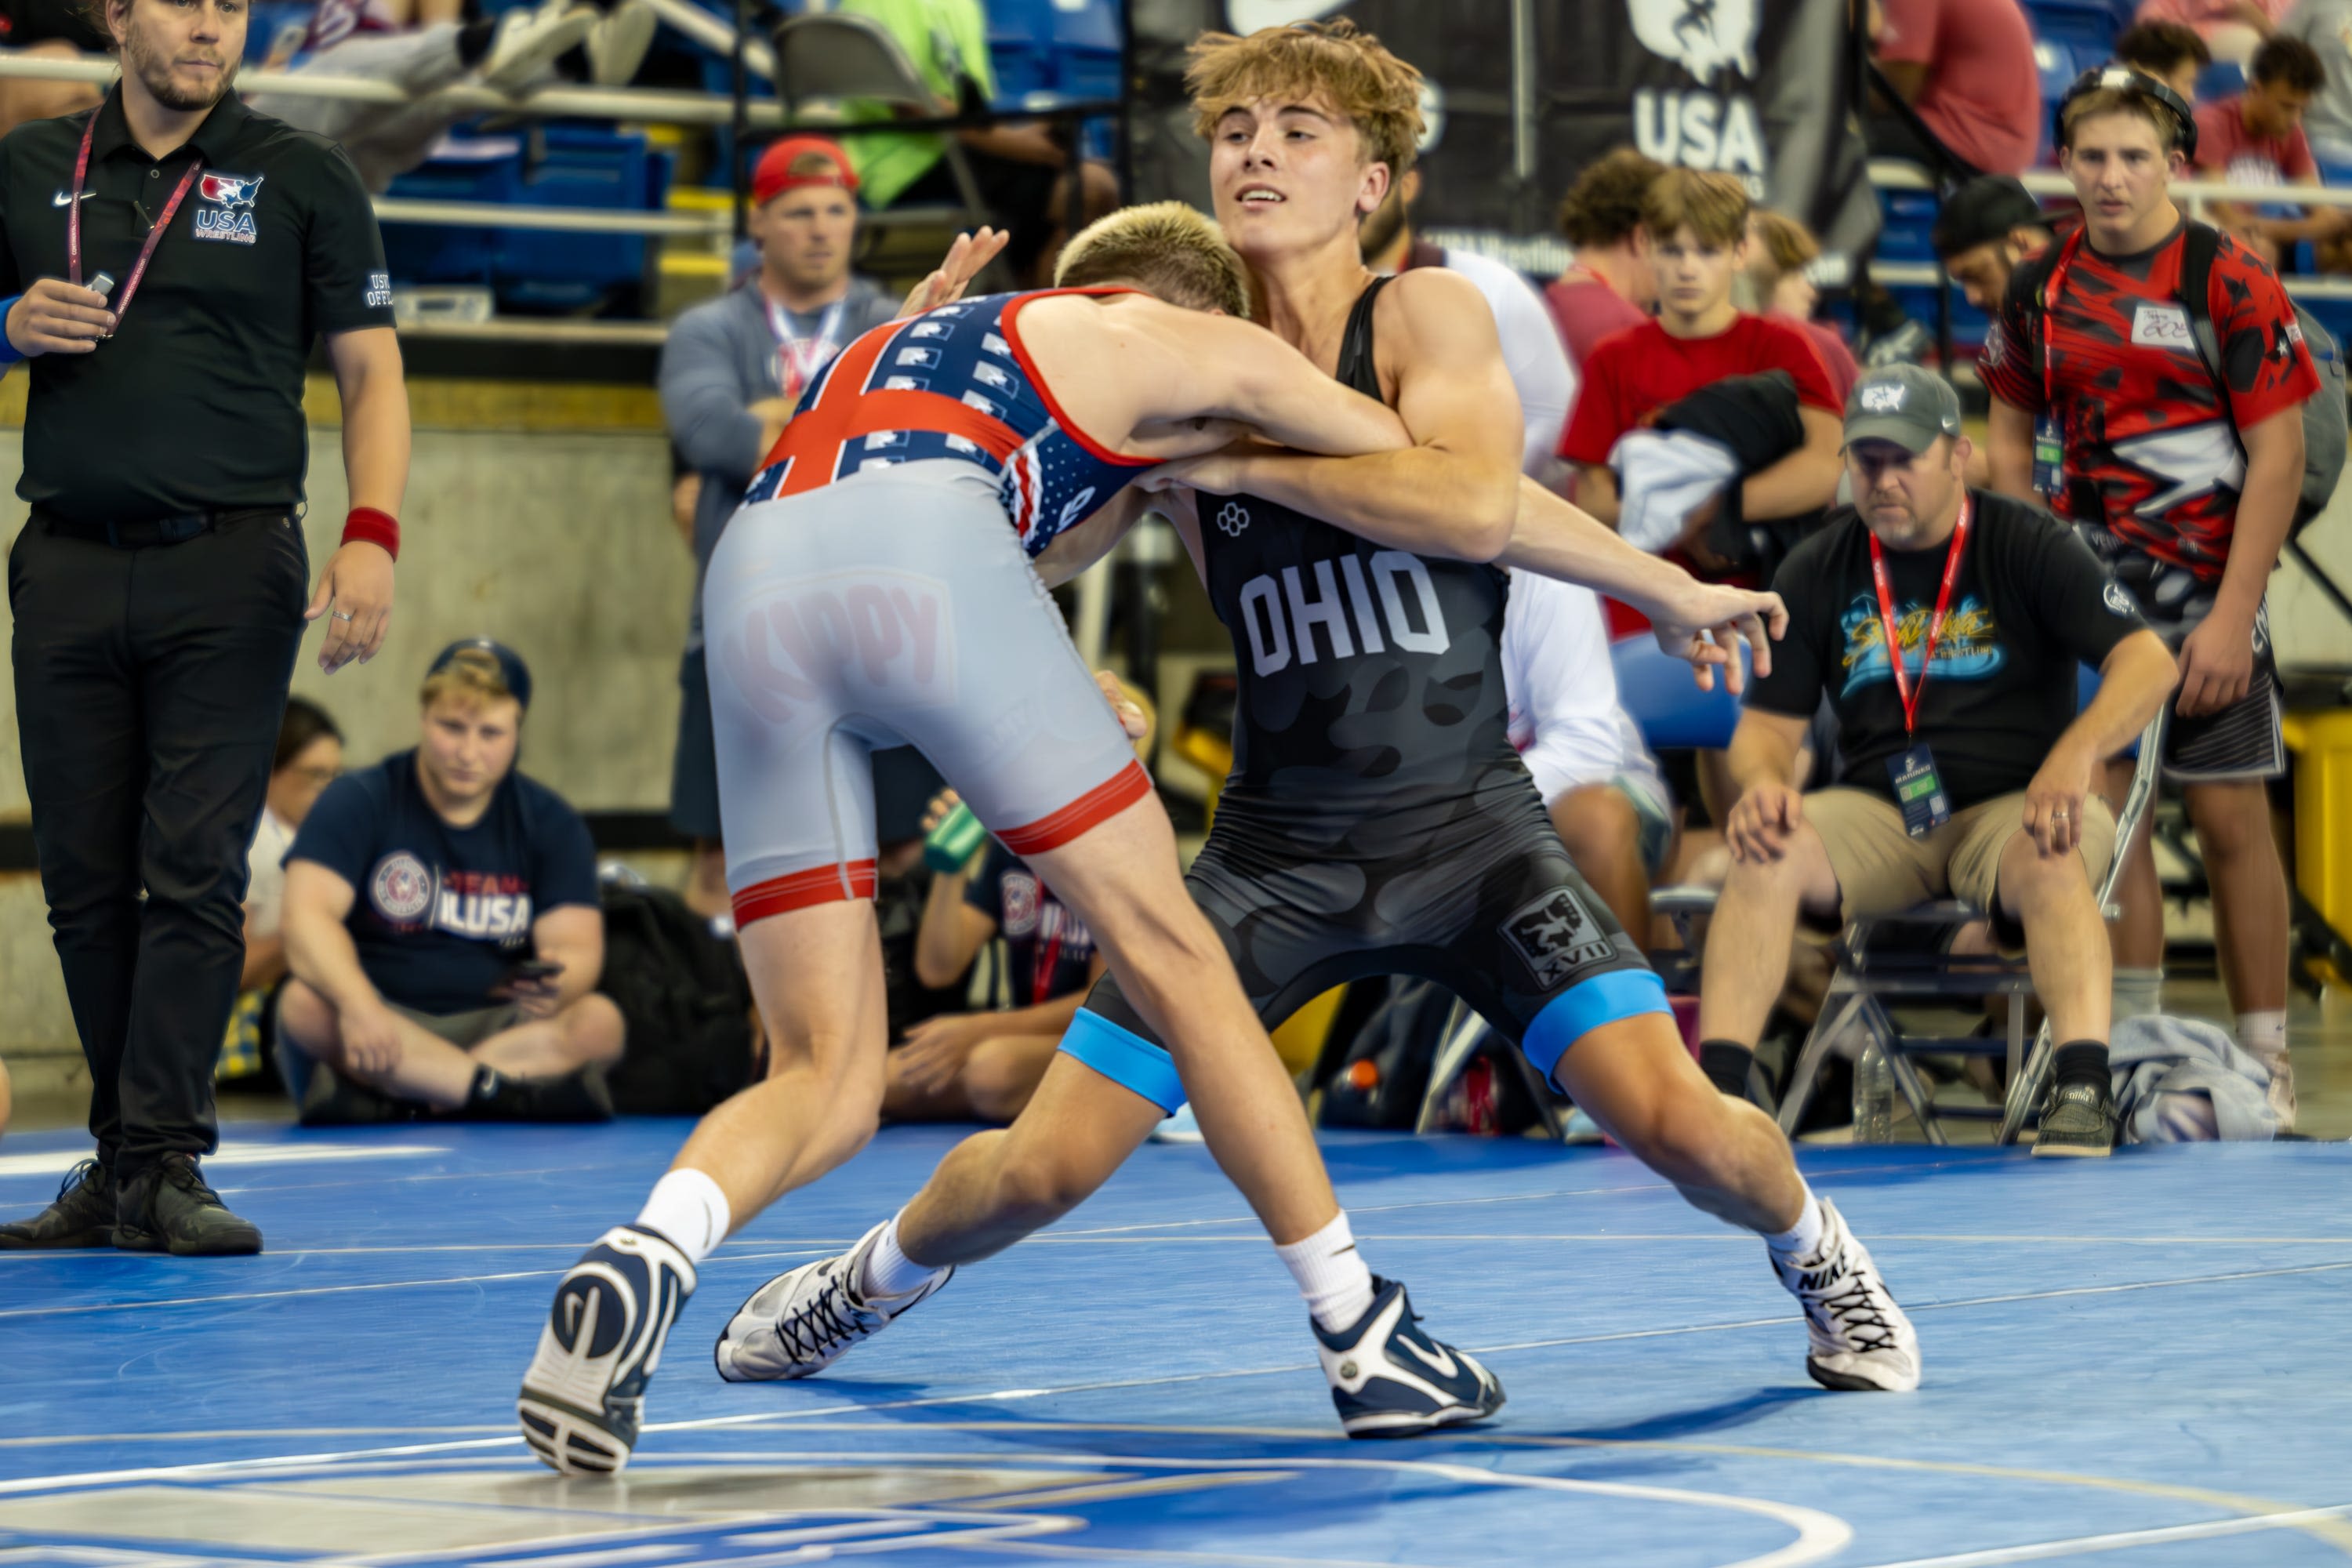 Perry's Liston Seibert in line for national title; 3 others one win from All-America